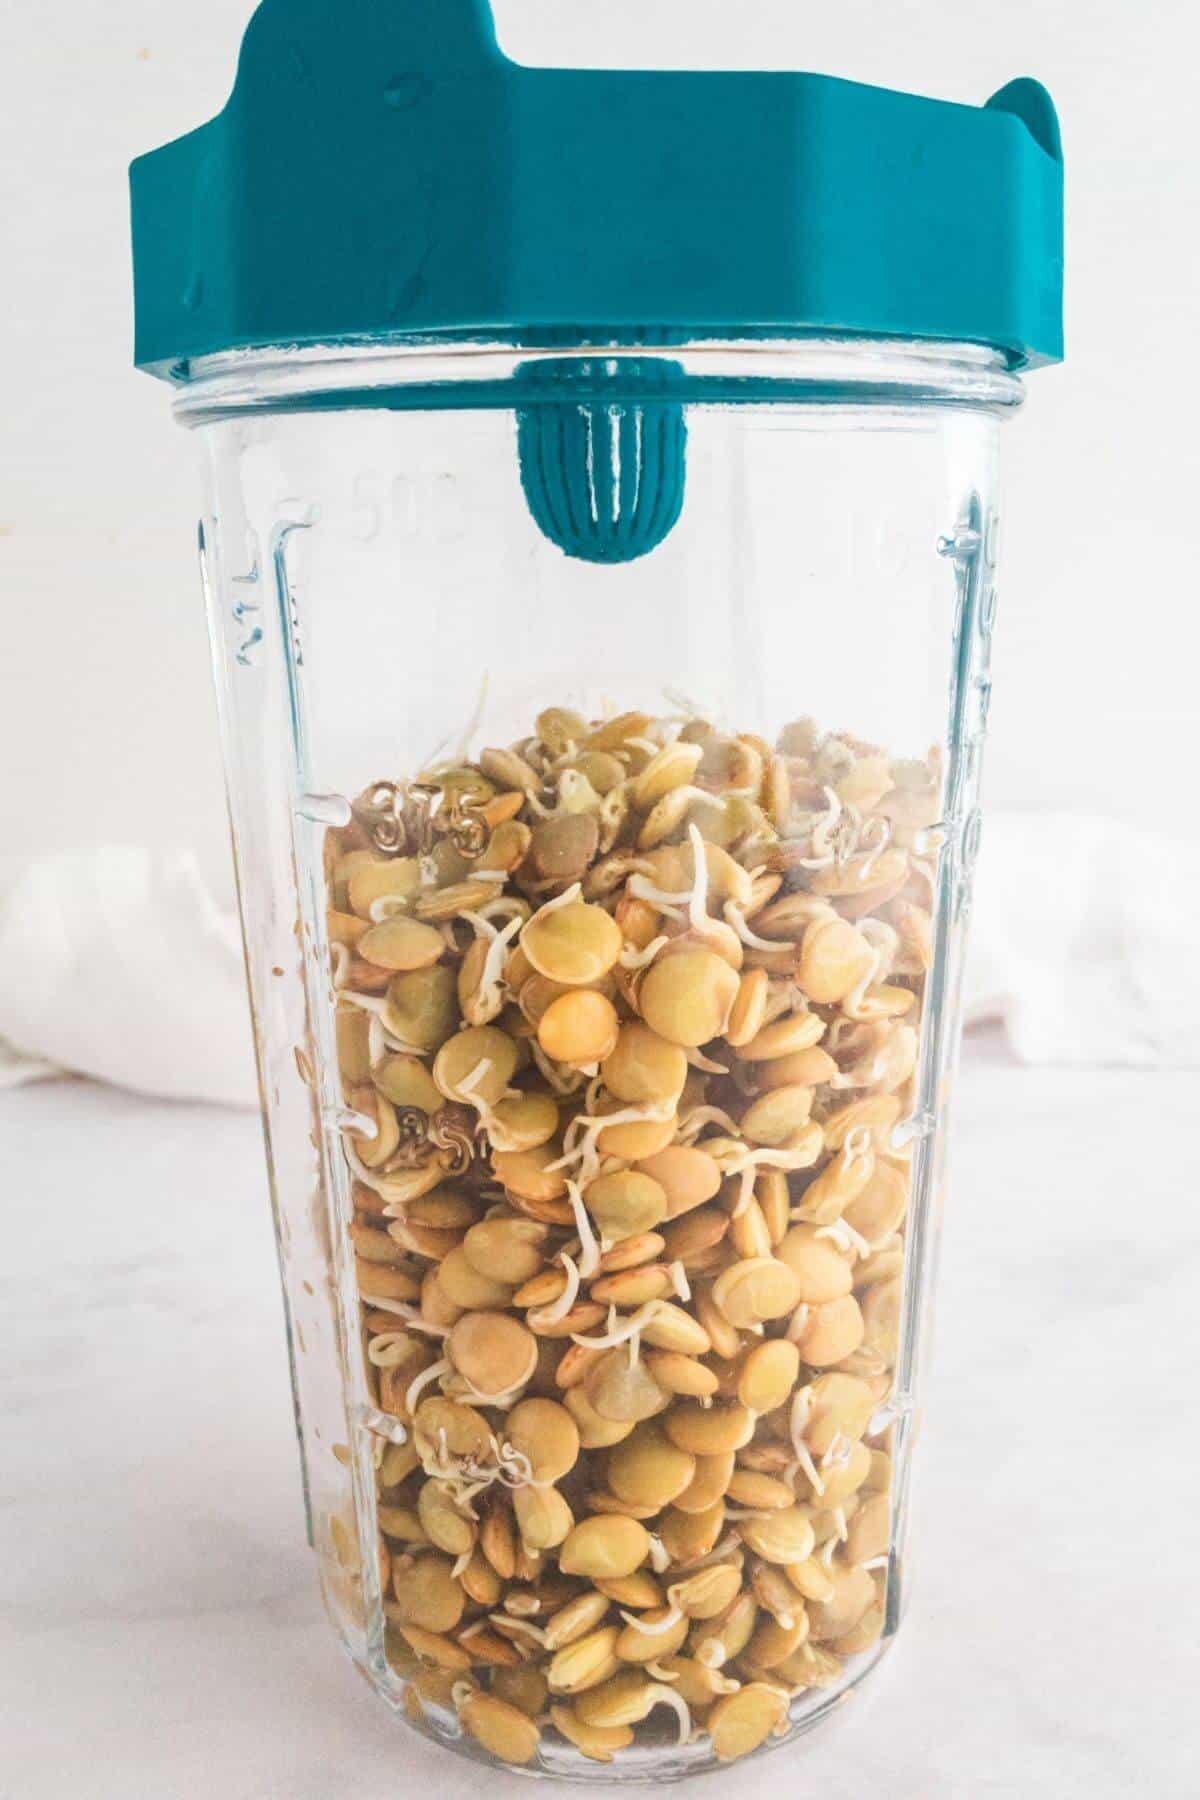 Lentils sprouting in a mason jar.